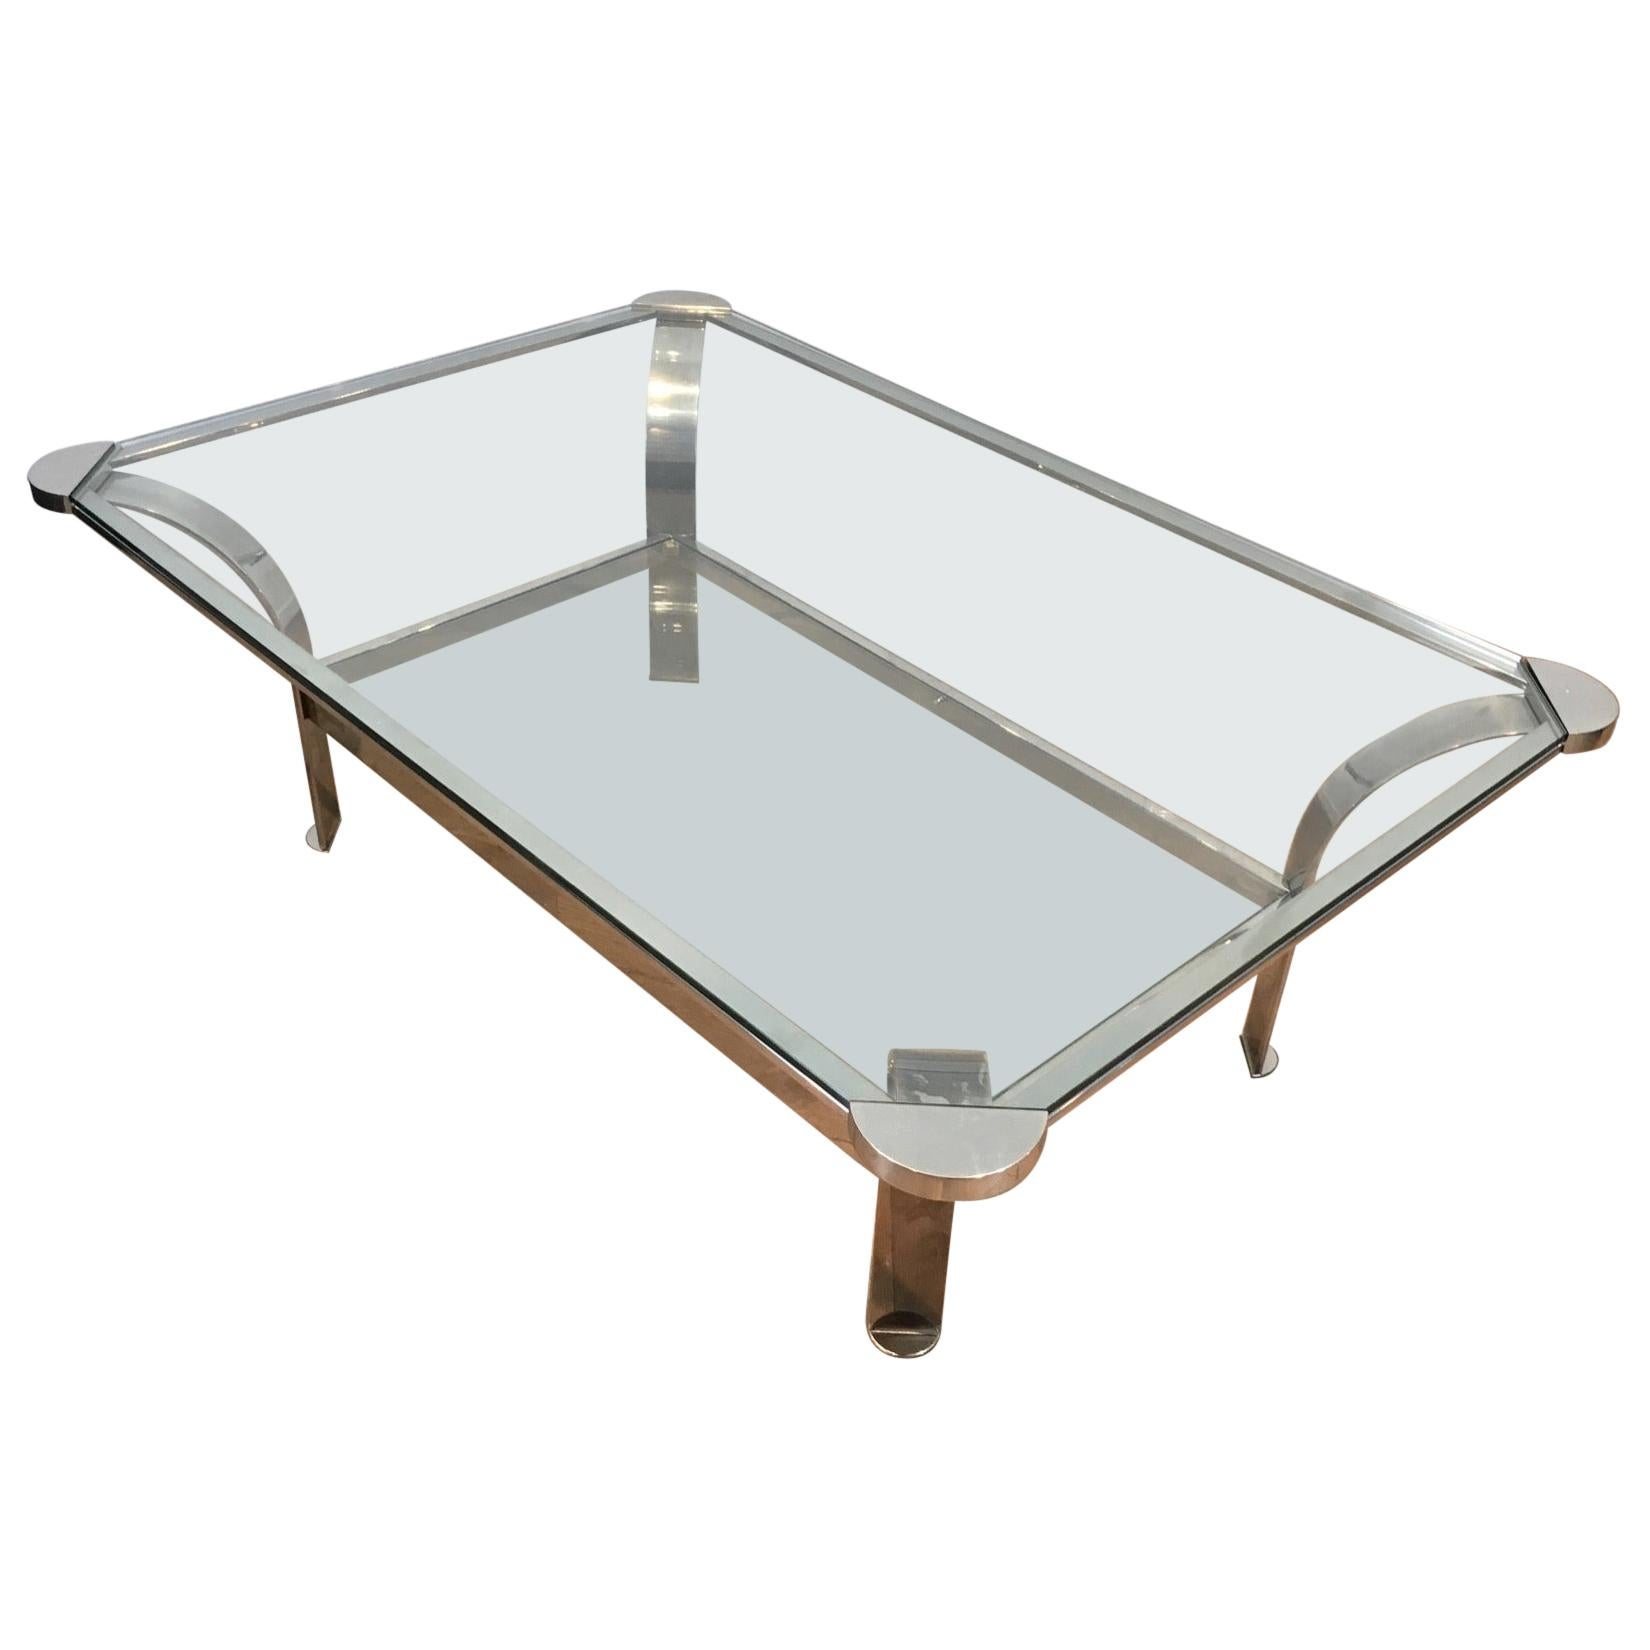 Large Design Chrome Coffee Table with Glass Shelves, French, Circa 1970